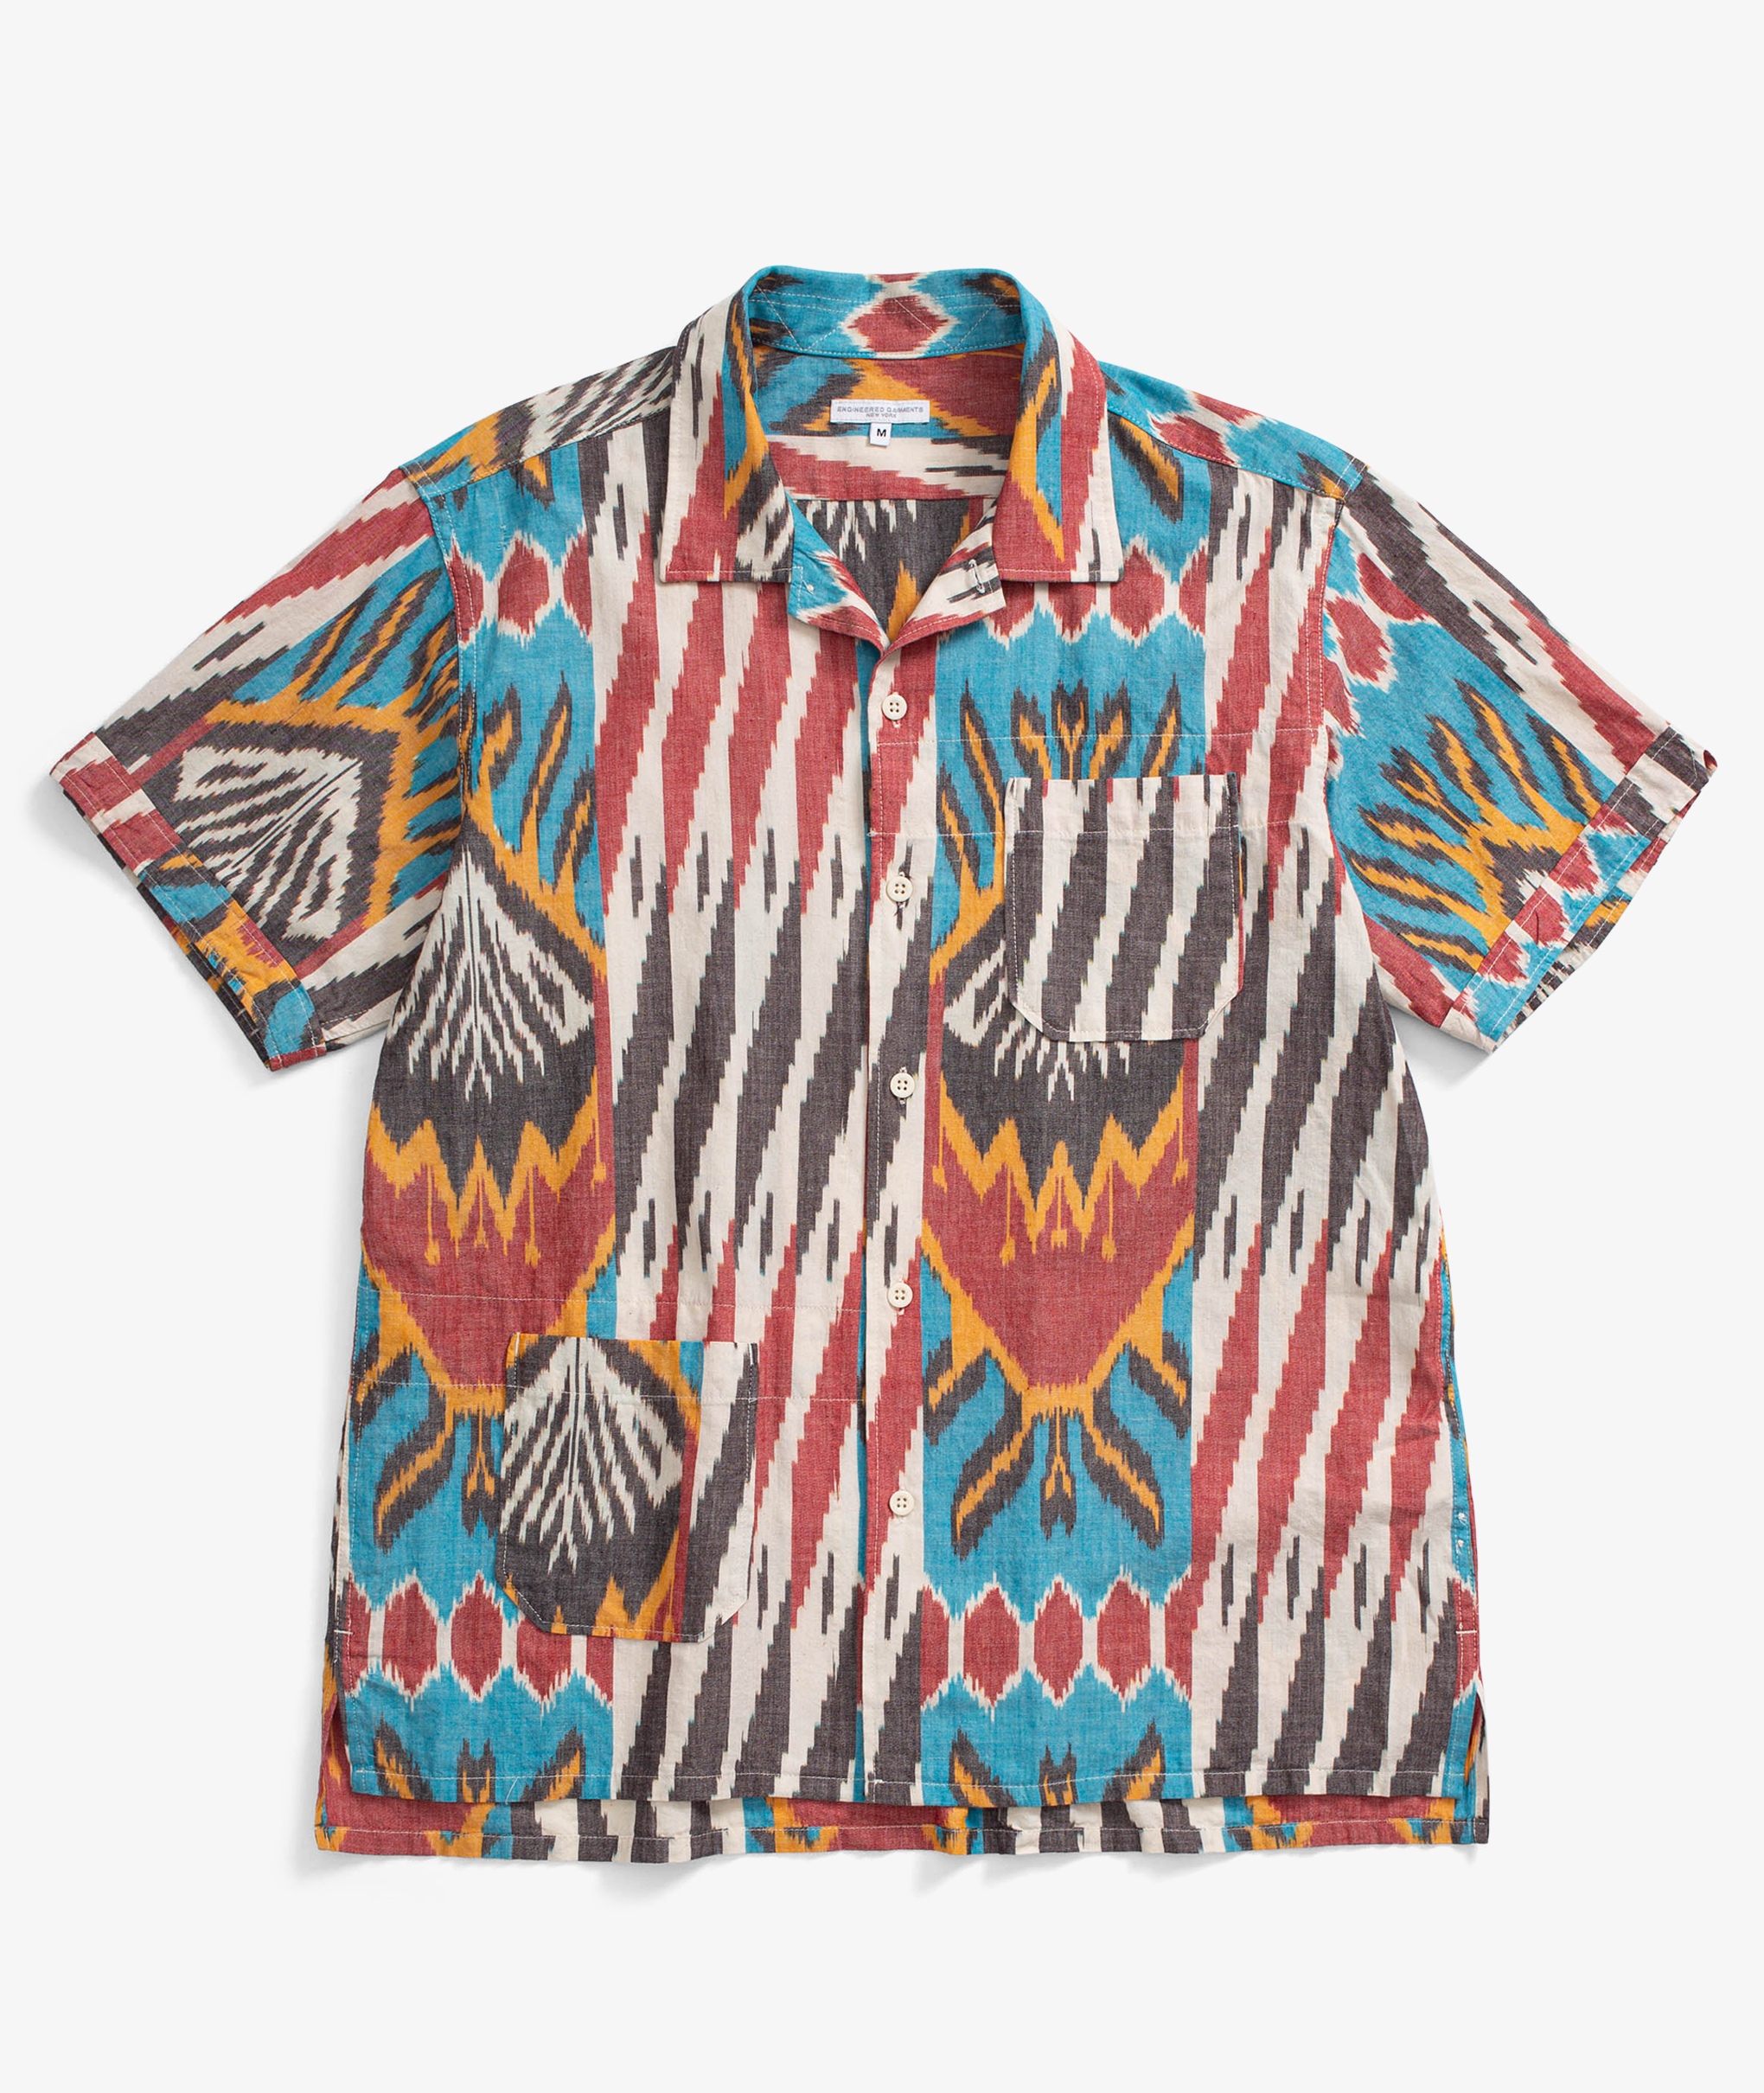 Norse Store | Shipping Worldwide - Engineered Garments Ikat Camp